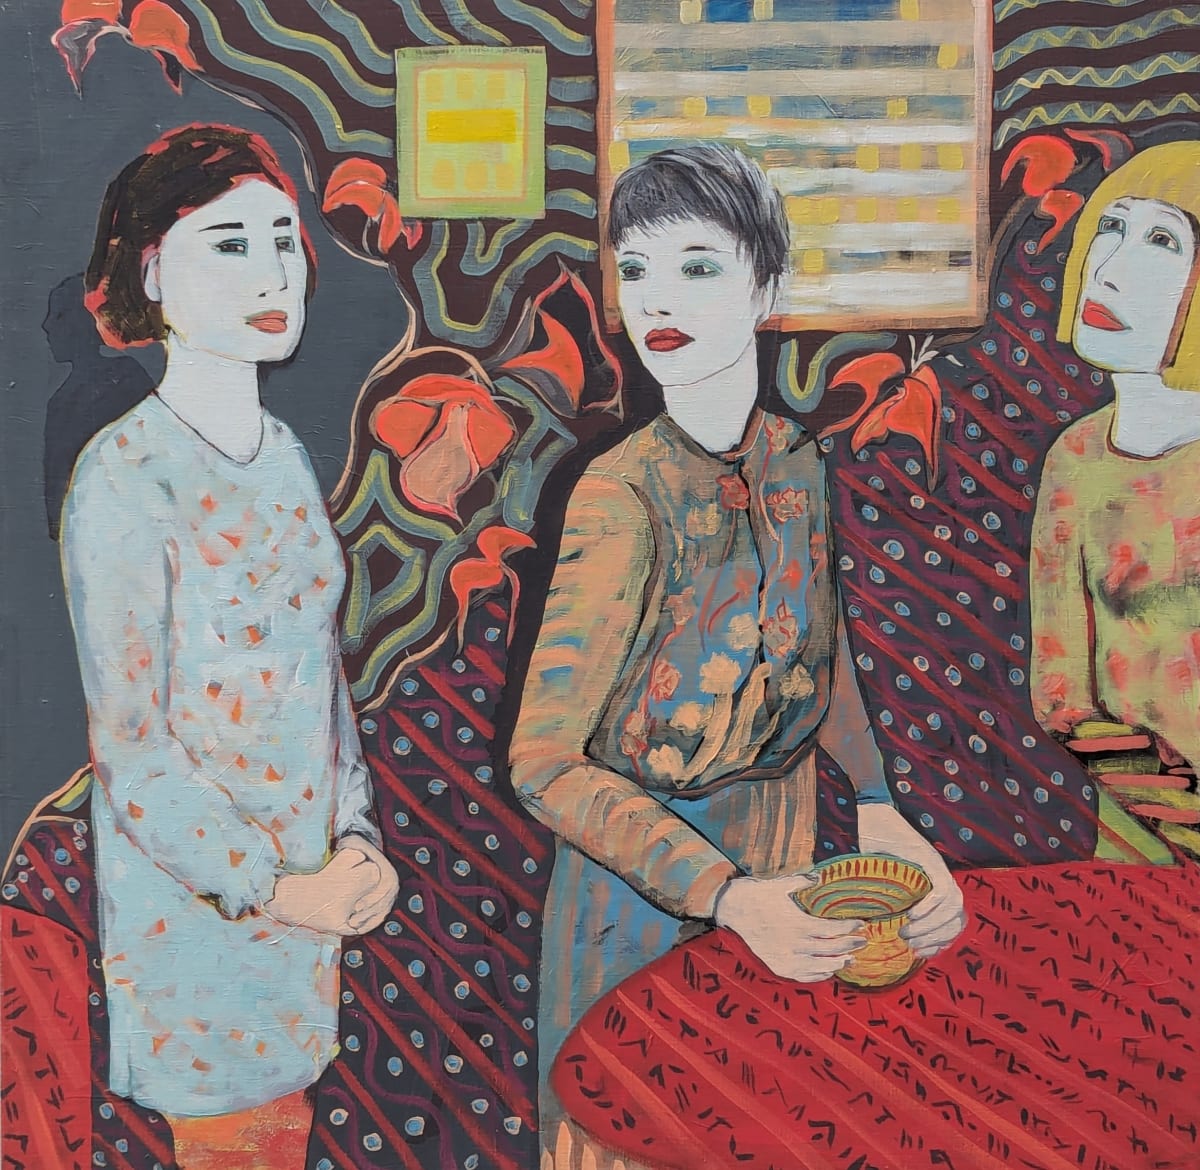 Flowers and Words II by Kenna Lee Barradell  Image: Three women enjoy each other's company.